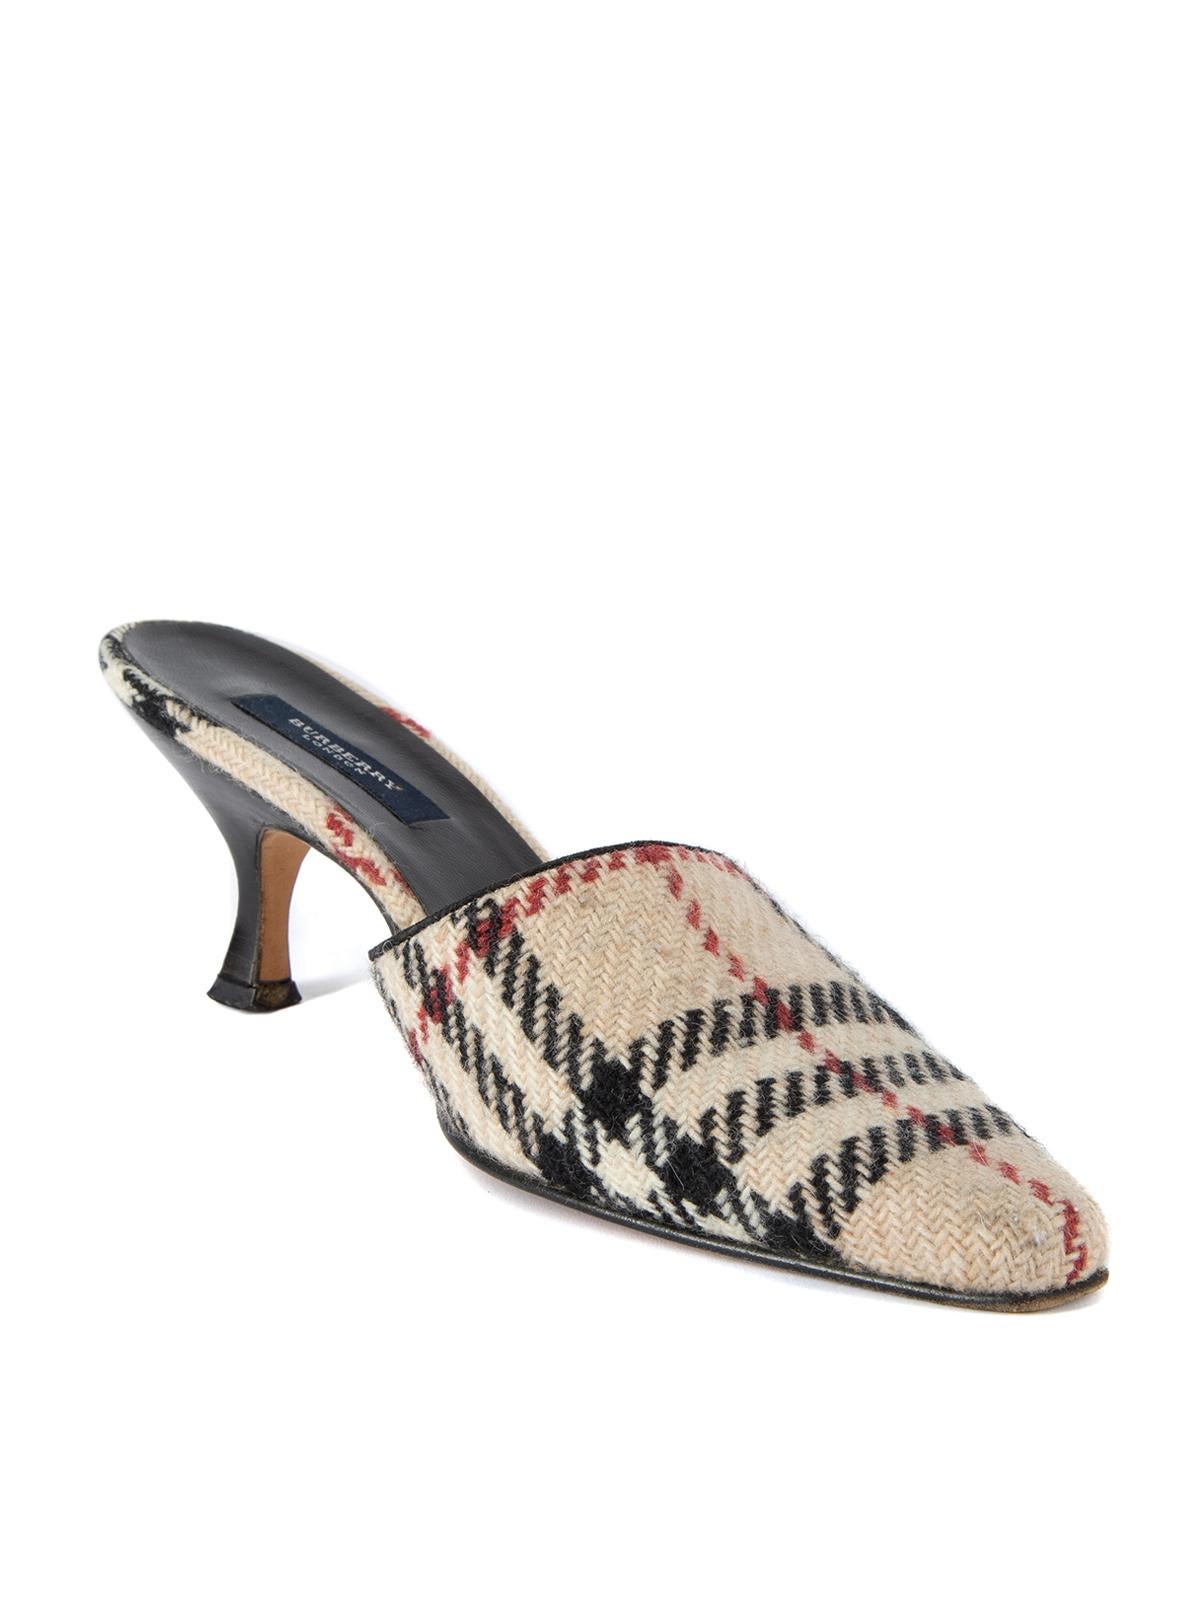 CONDITION is Very good. Minimal wear to heels is evident. Minimal wear to outer tweed material and the outsole on this used Burberry designer resale item. Details Multicolour- Beige, black and red Tweed Mules Pointed toe Kitten heel Checked pattern